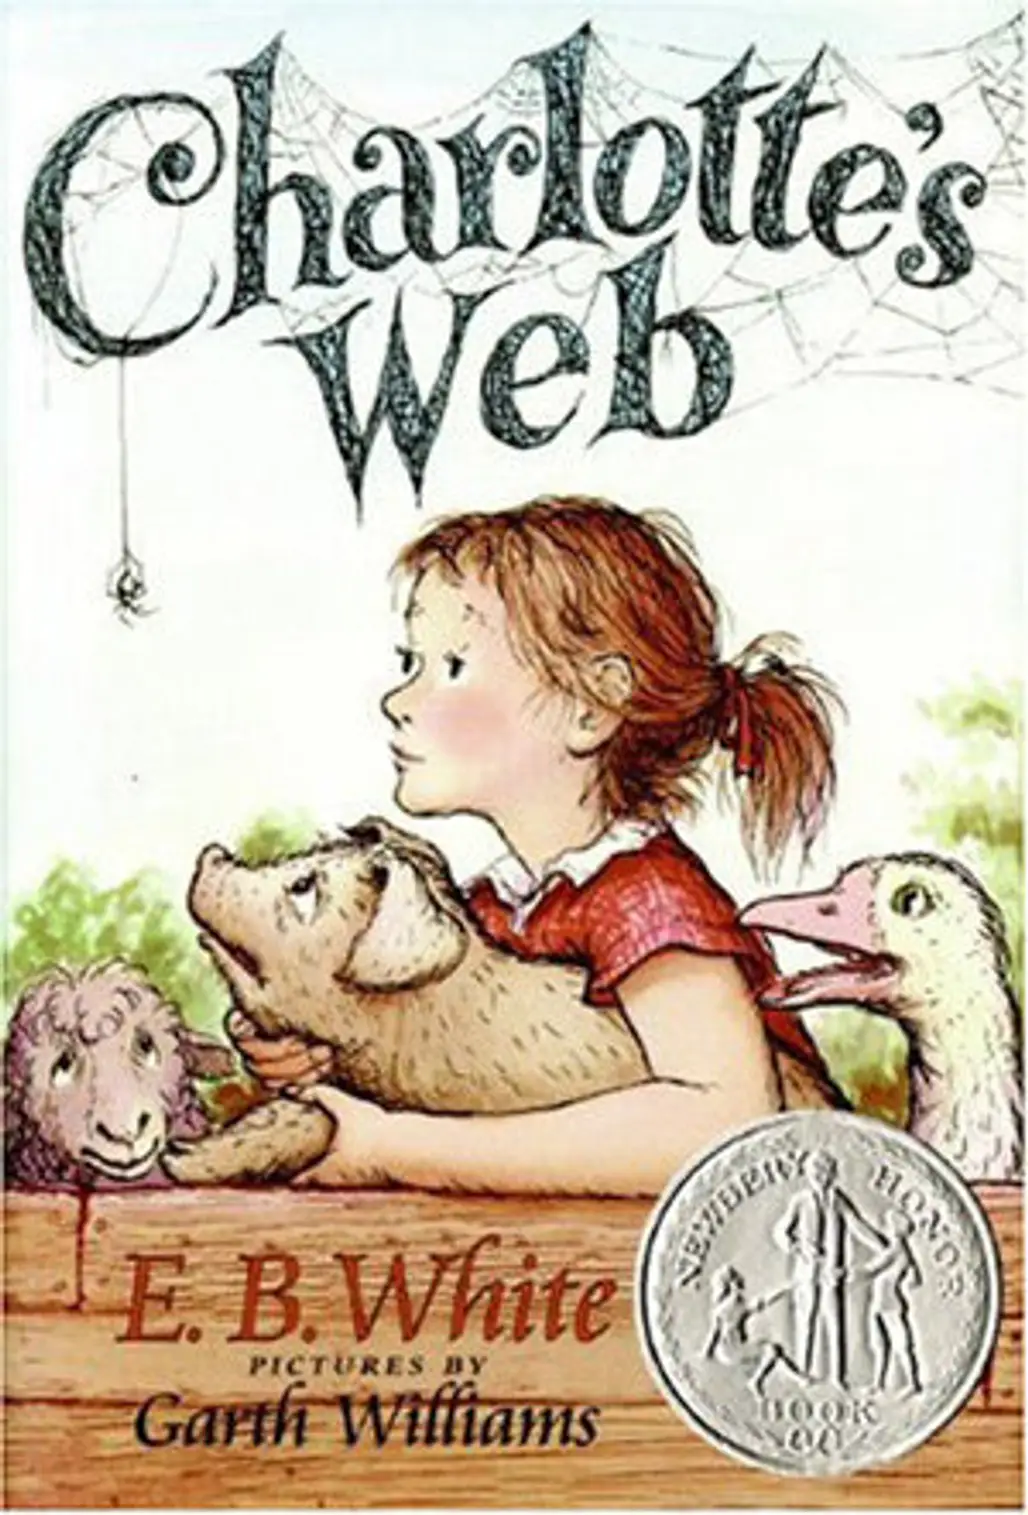 Wilbur from “Charlotte’s Web”